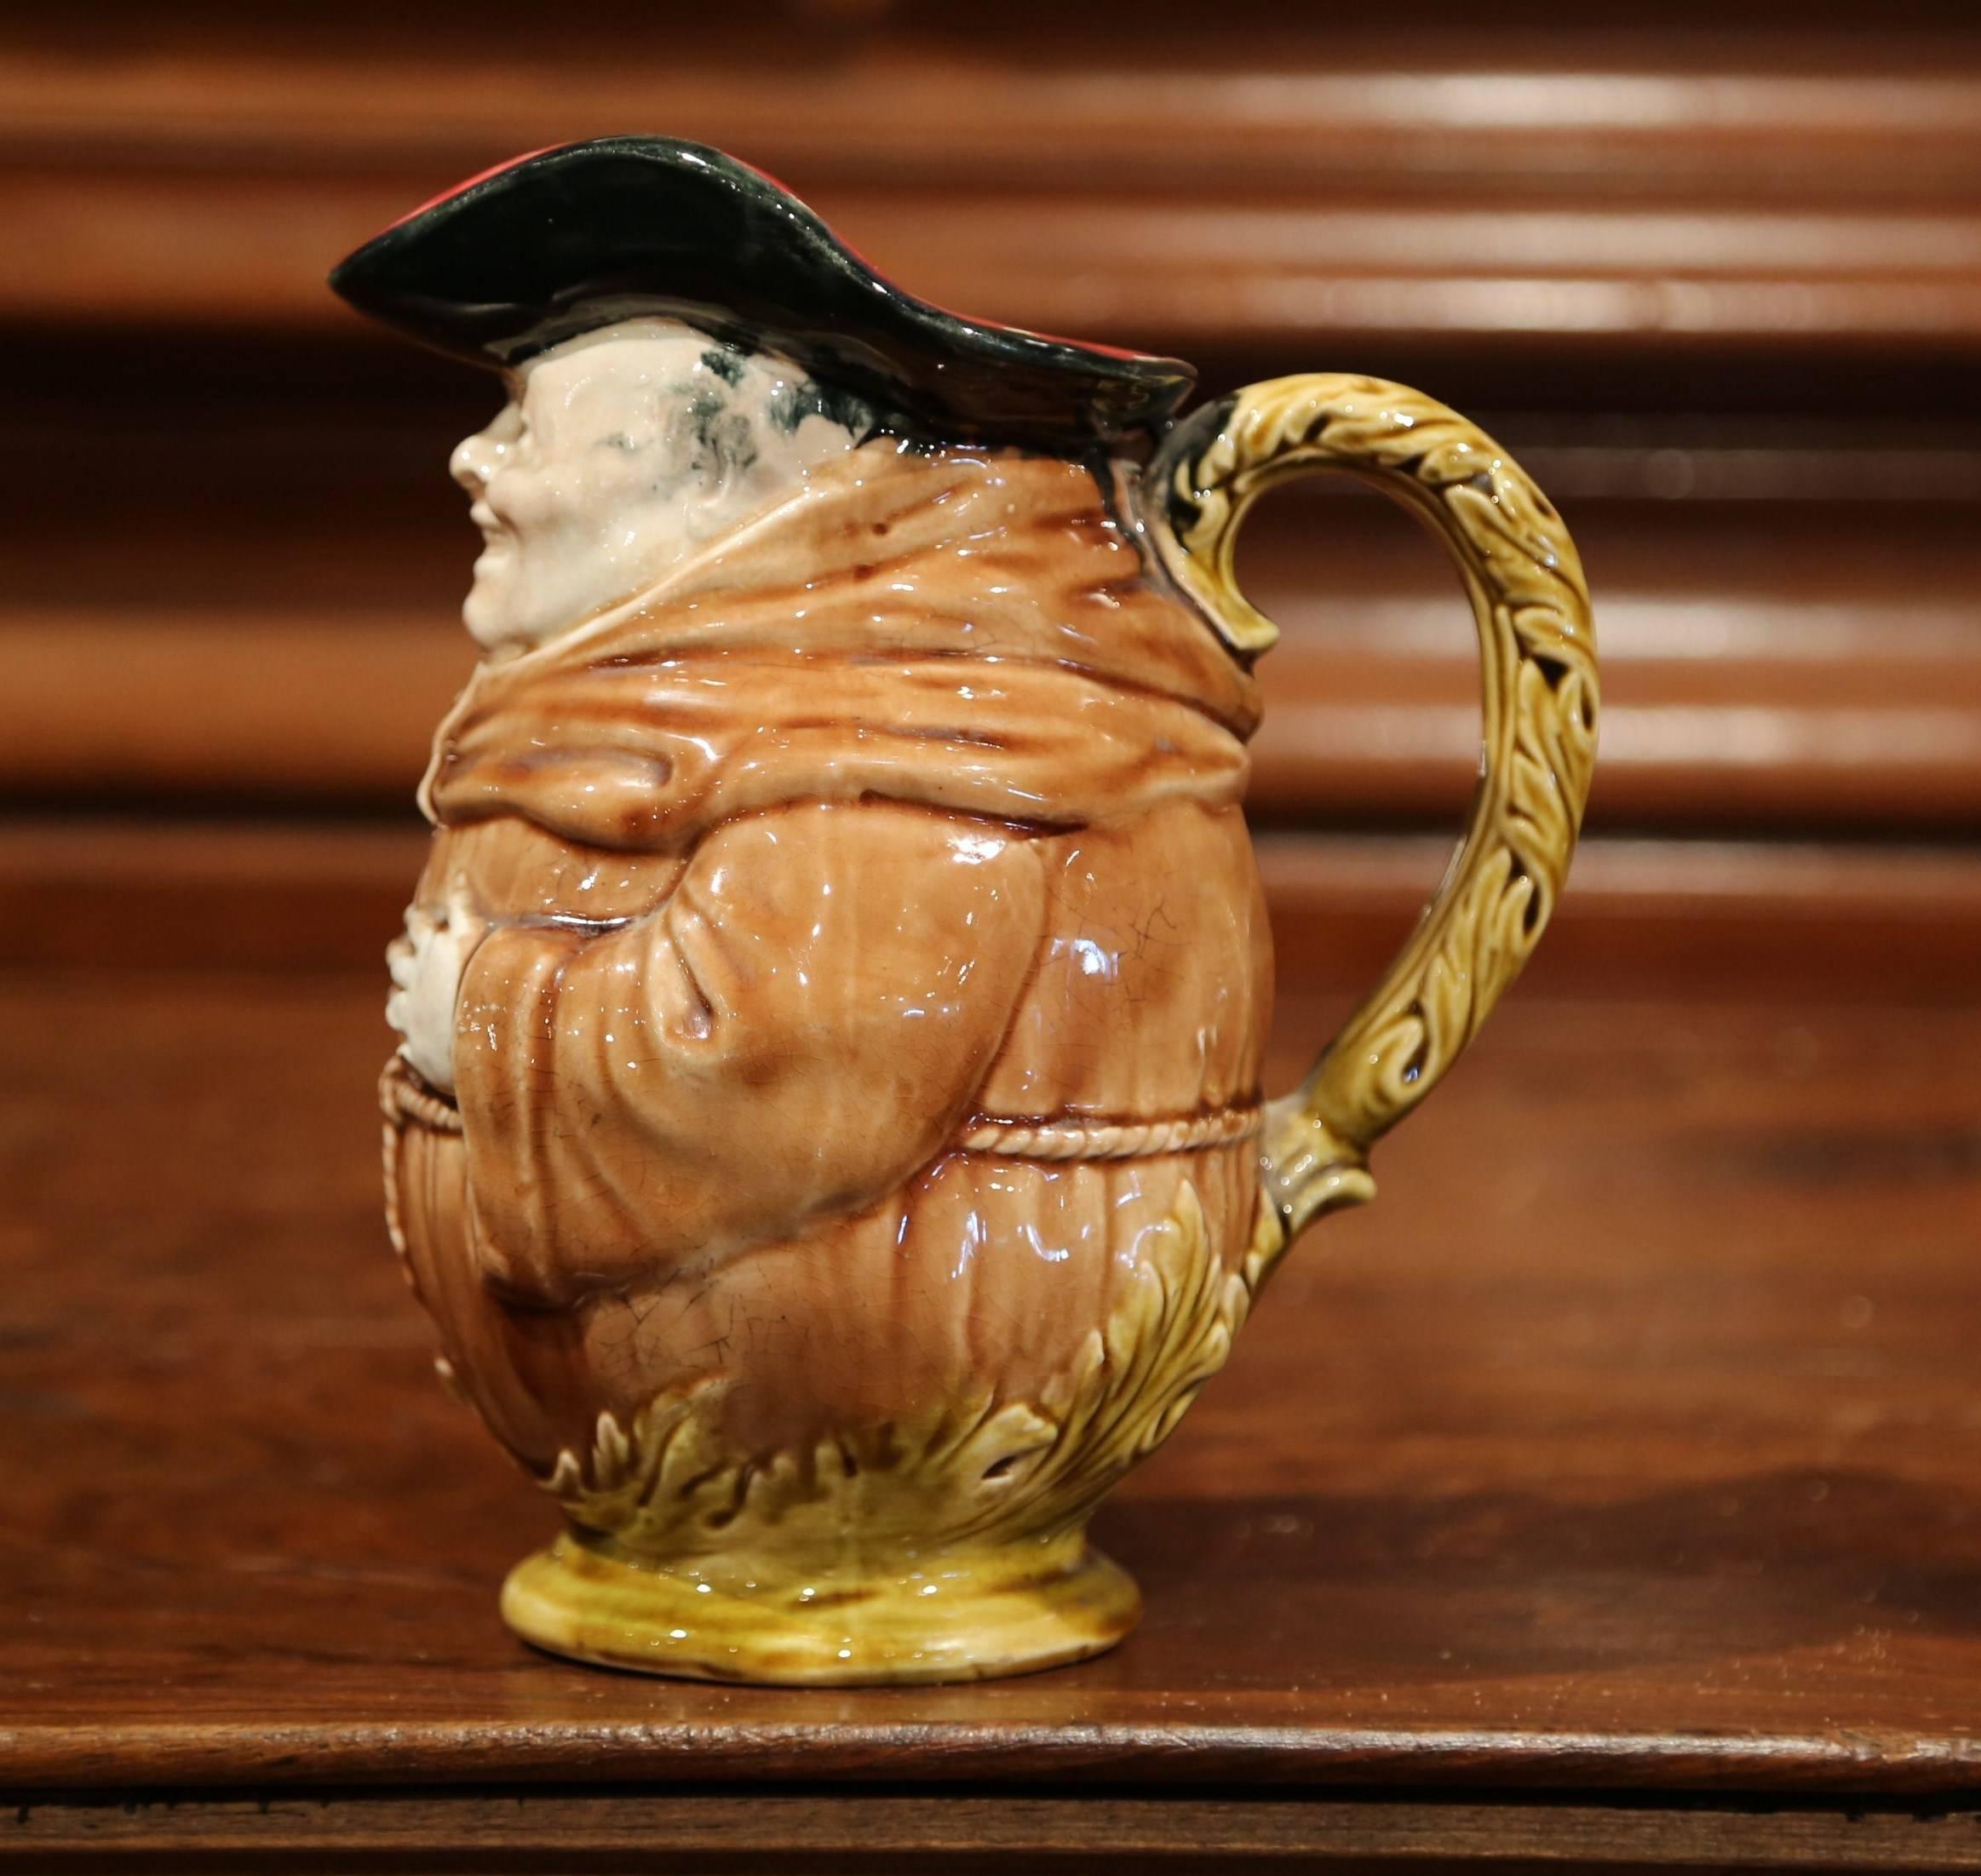 This charming, sculptural majolica pitcher was crafted in France circa 1880. The antique, barbotine jug by Onnaing features a smiling monk with his hands on his chest in a greeting pose. The base and handle are decorated with pale green acanthus